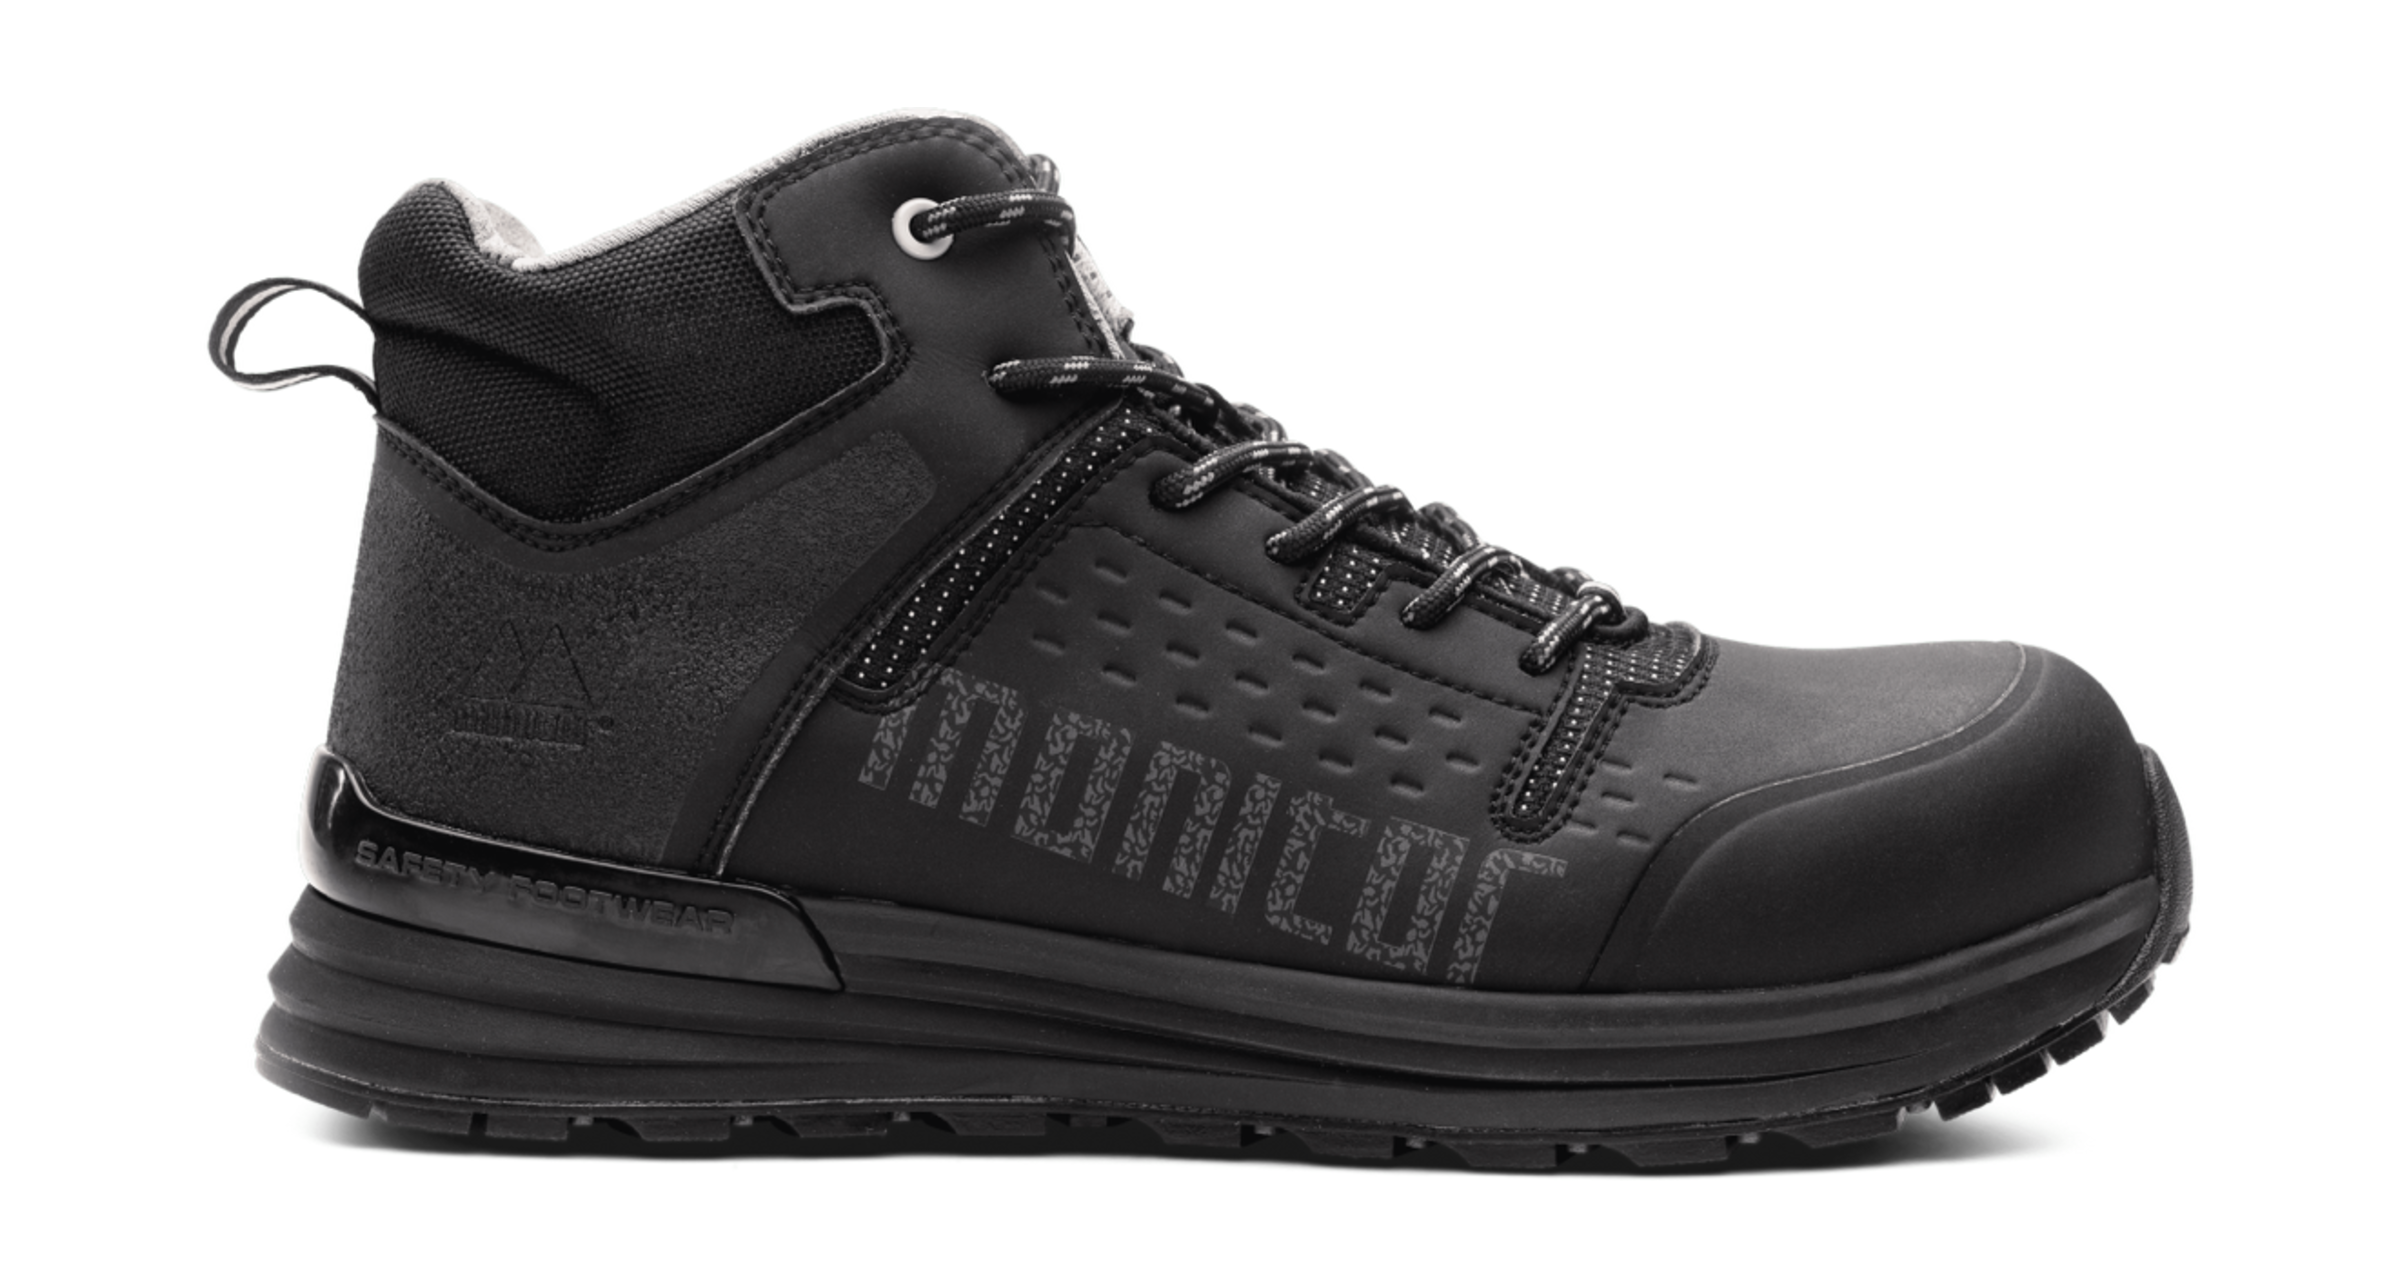 Monitor S.W.A.T. Safety Boot